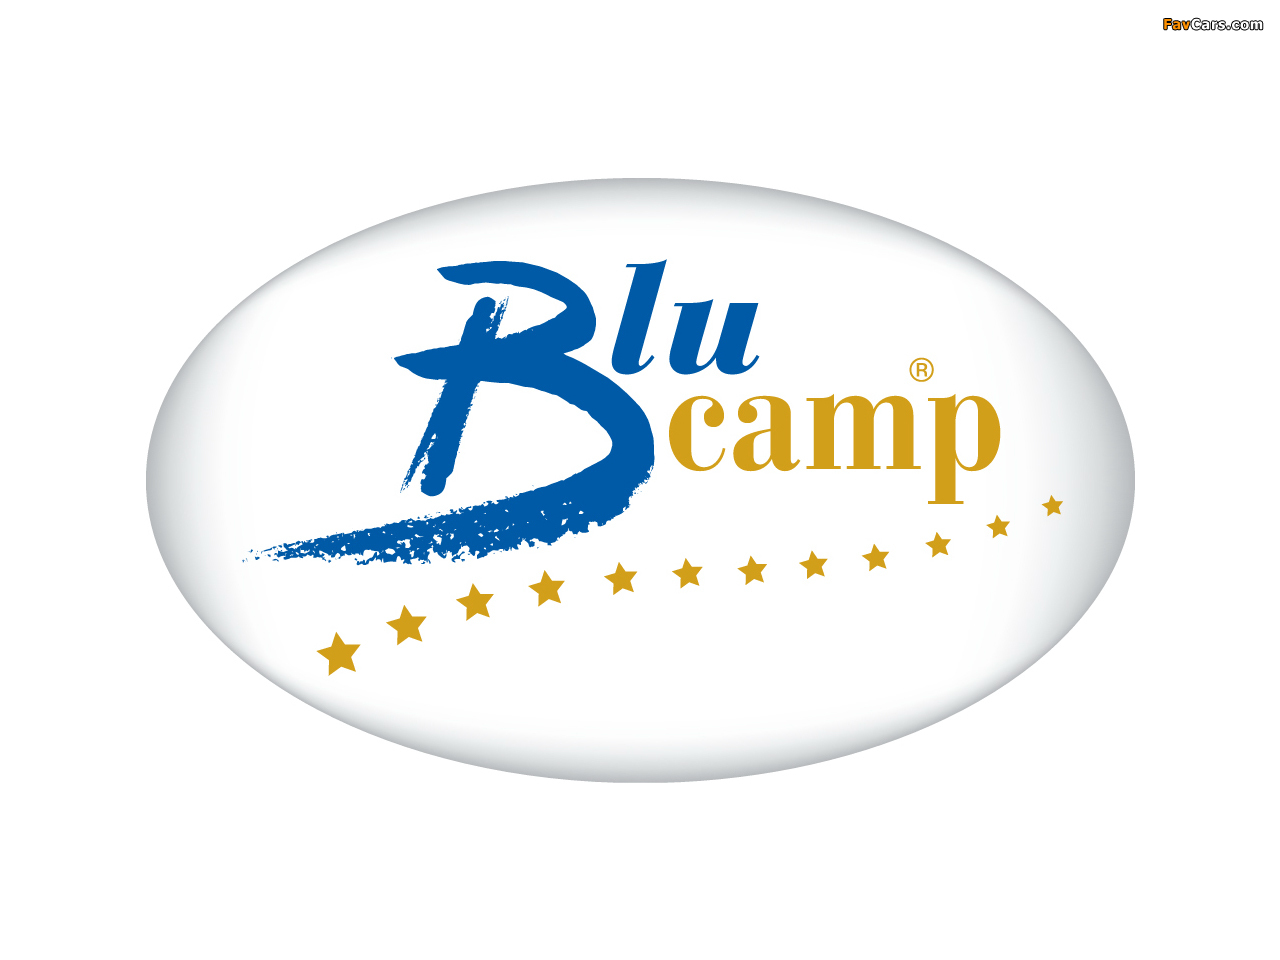 Blucamp wallpapers (1280 x 960)